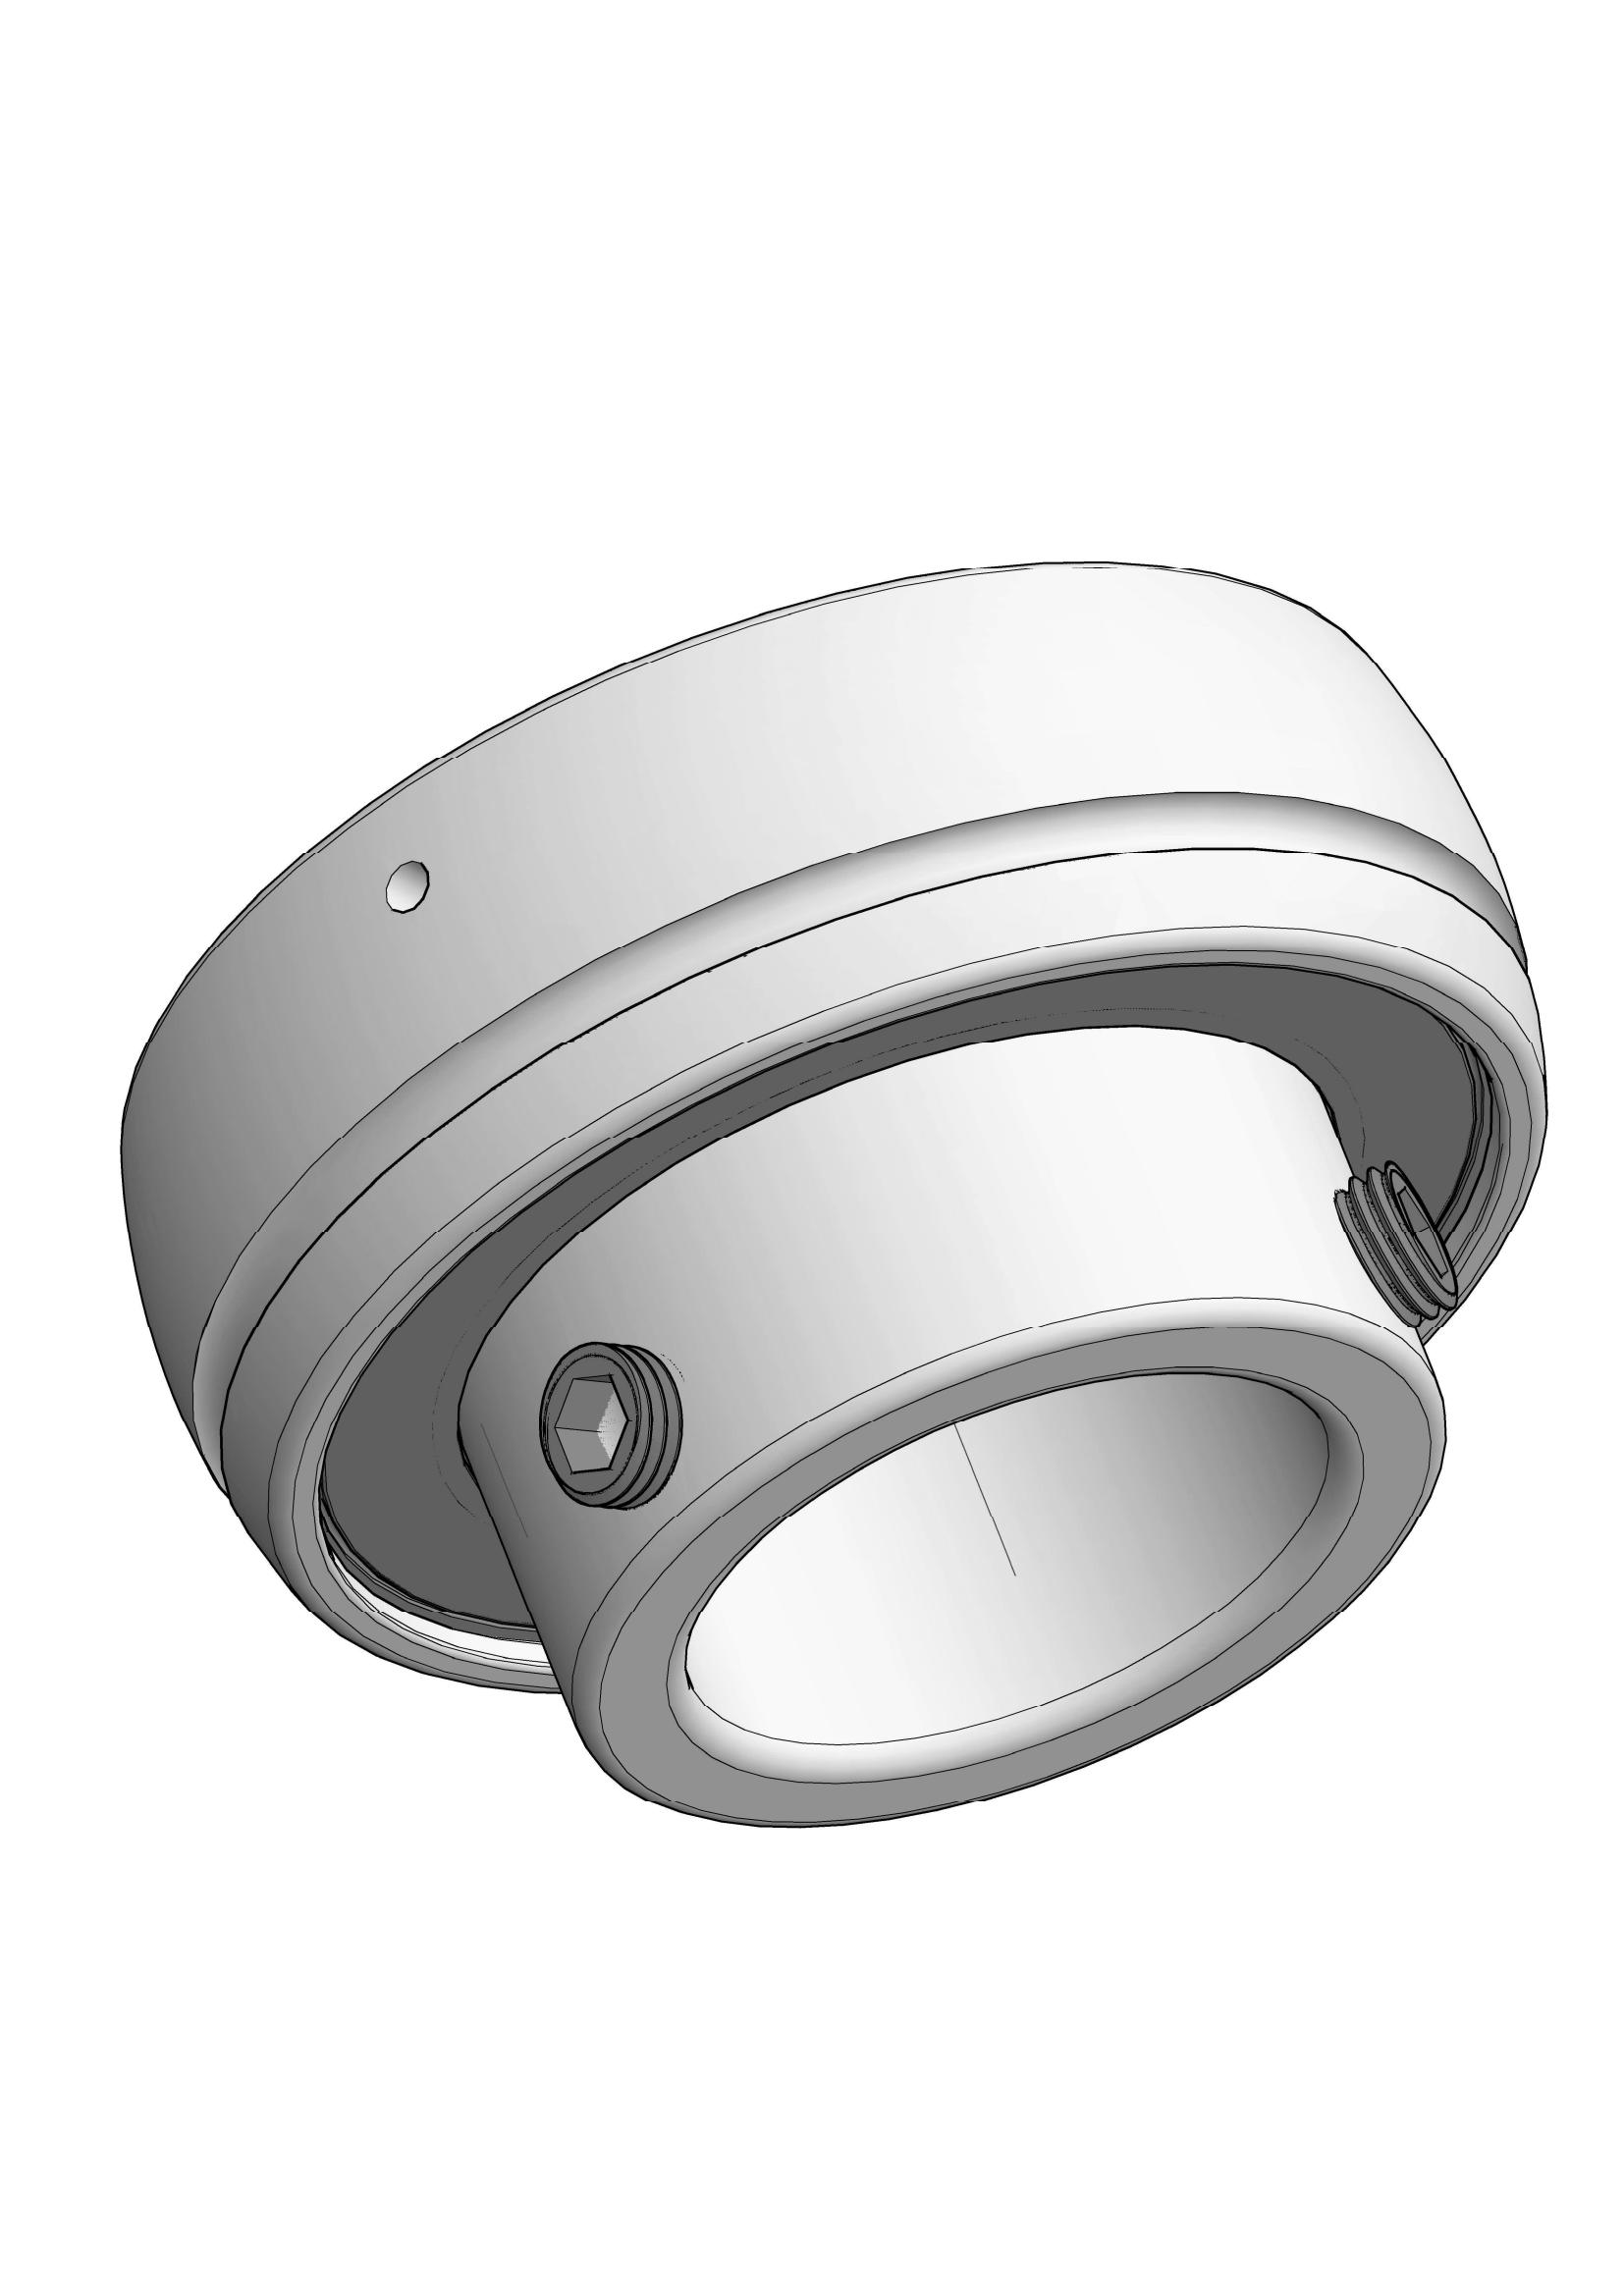 SB206 insert ball bearings with Eccentric Collar Lock with 30mm Bore